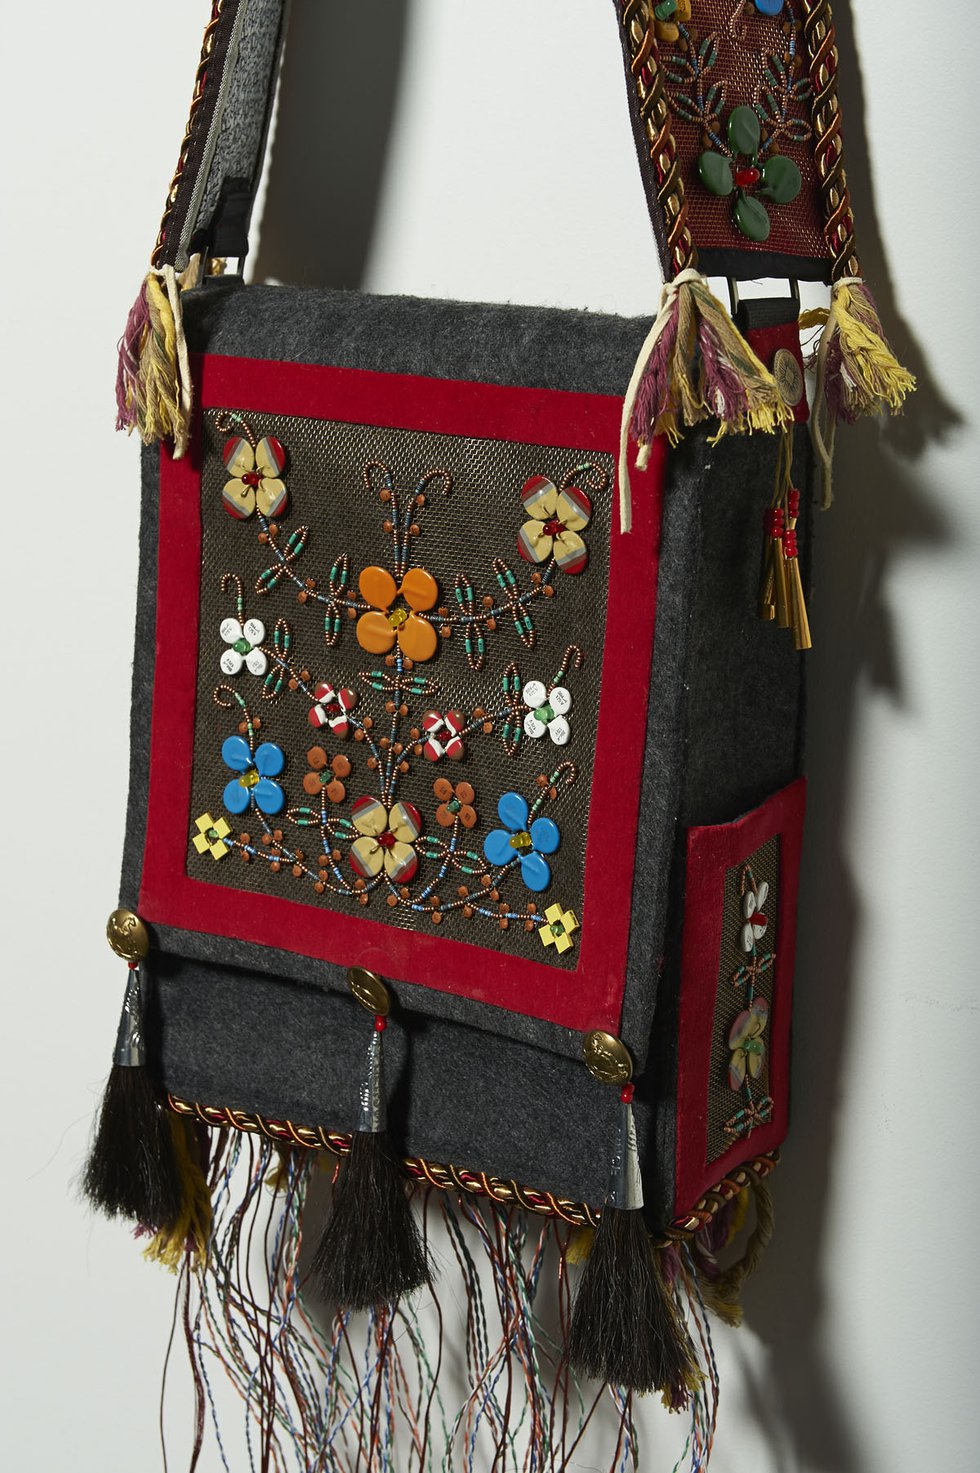 Barry Ace, “Aazhooningwa’igan (“It is worn across the shoulder),” 2015